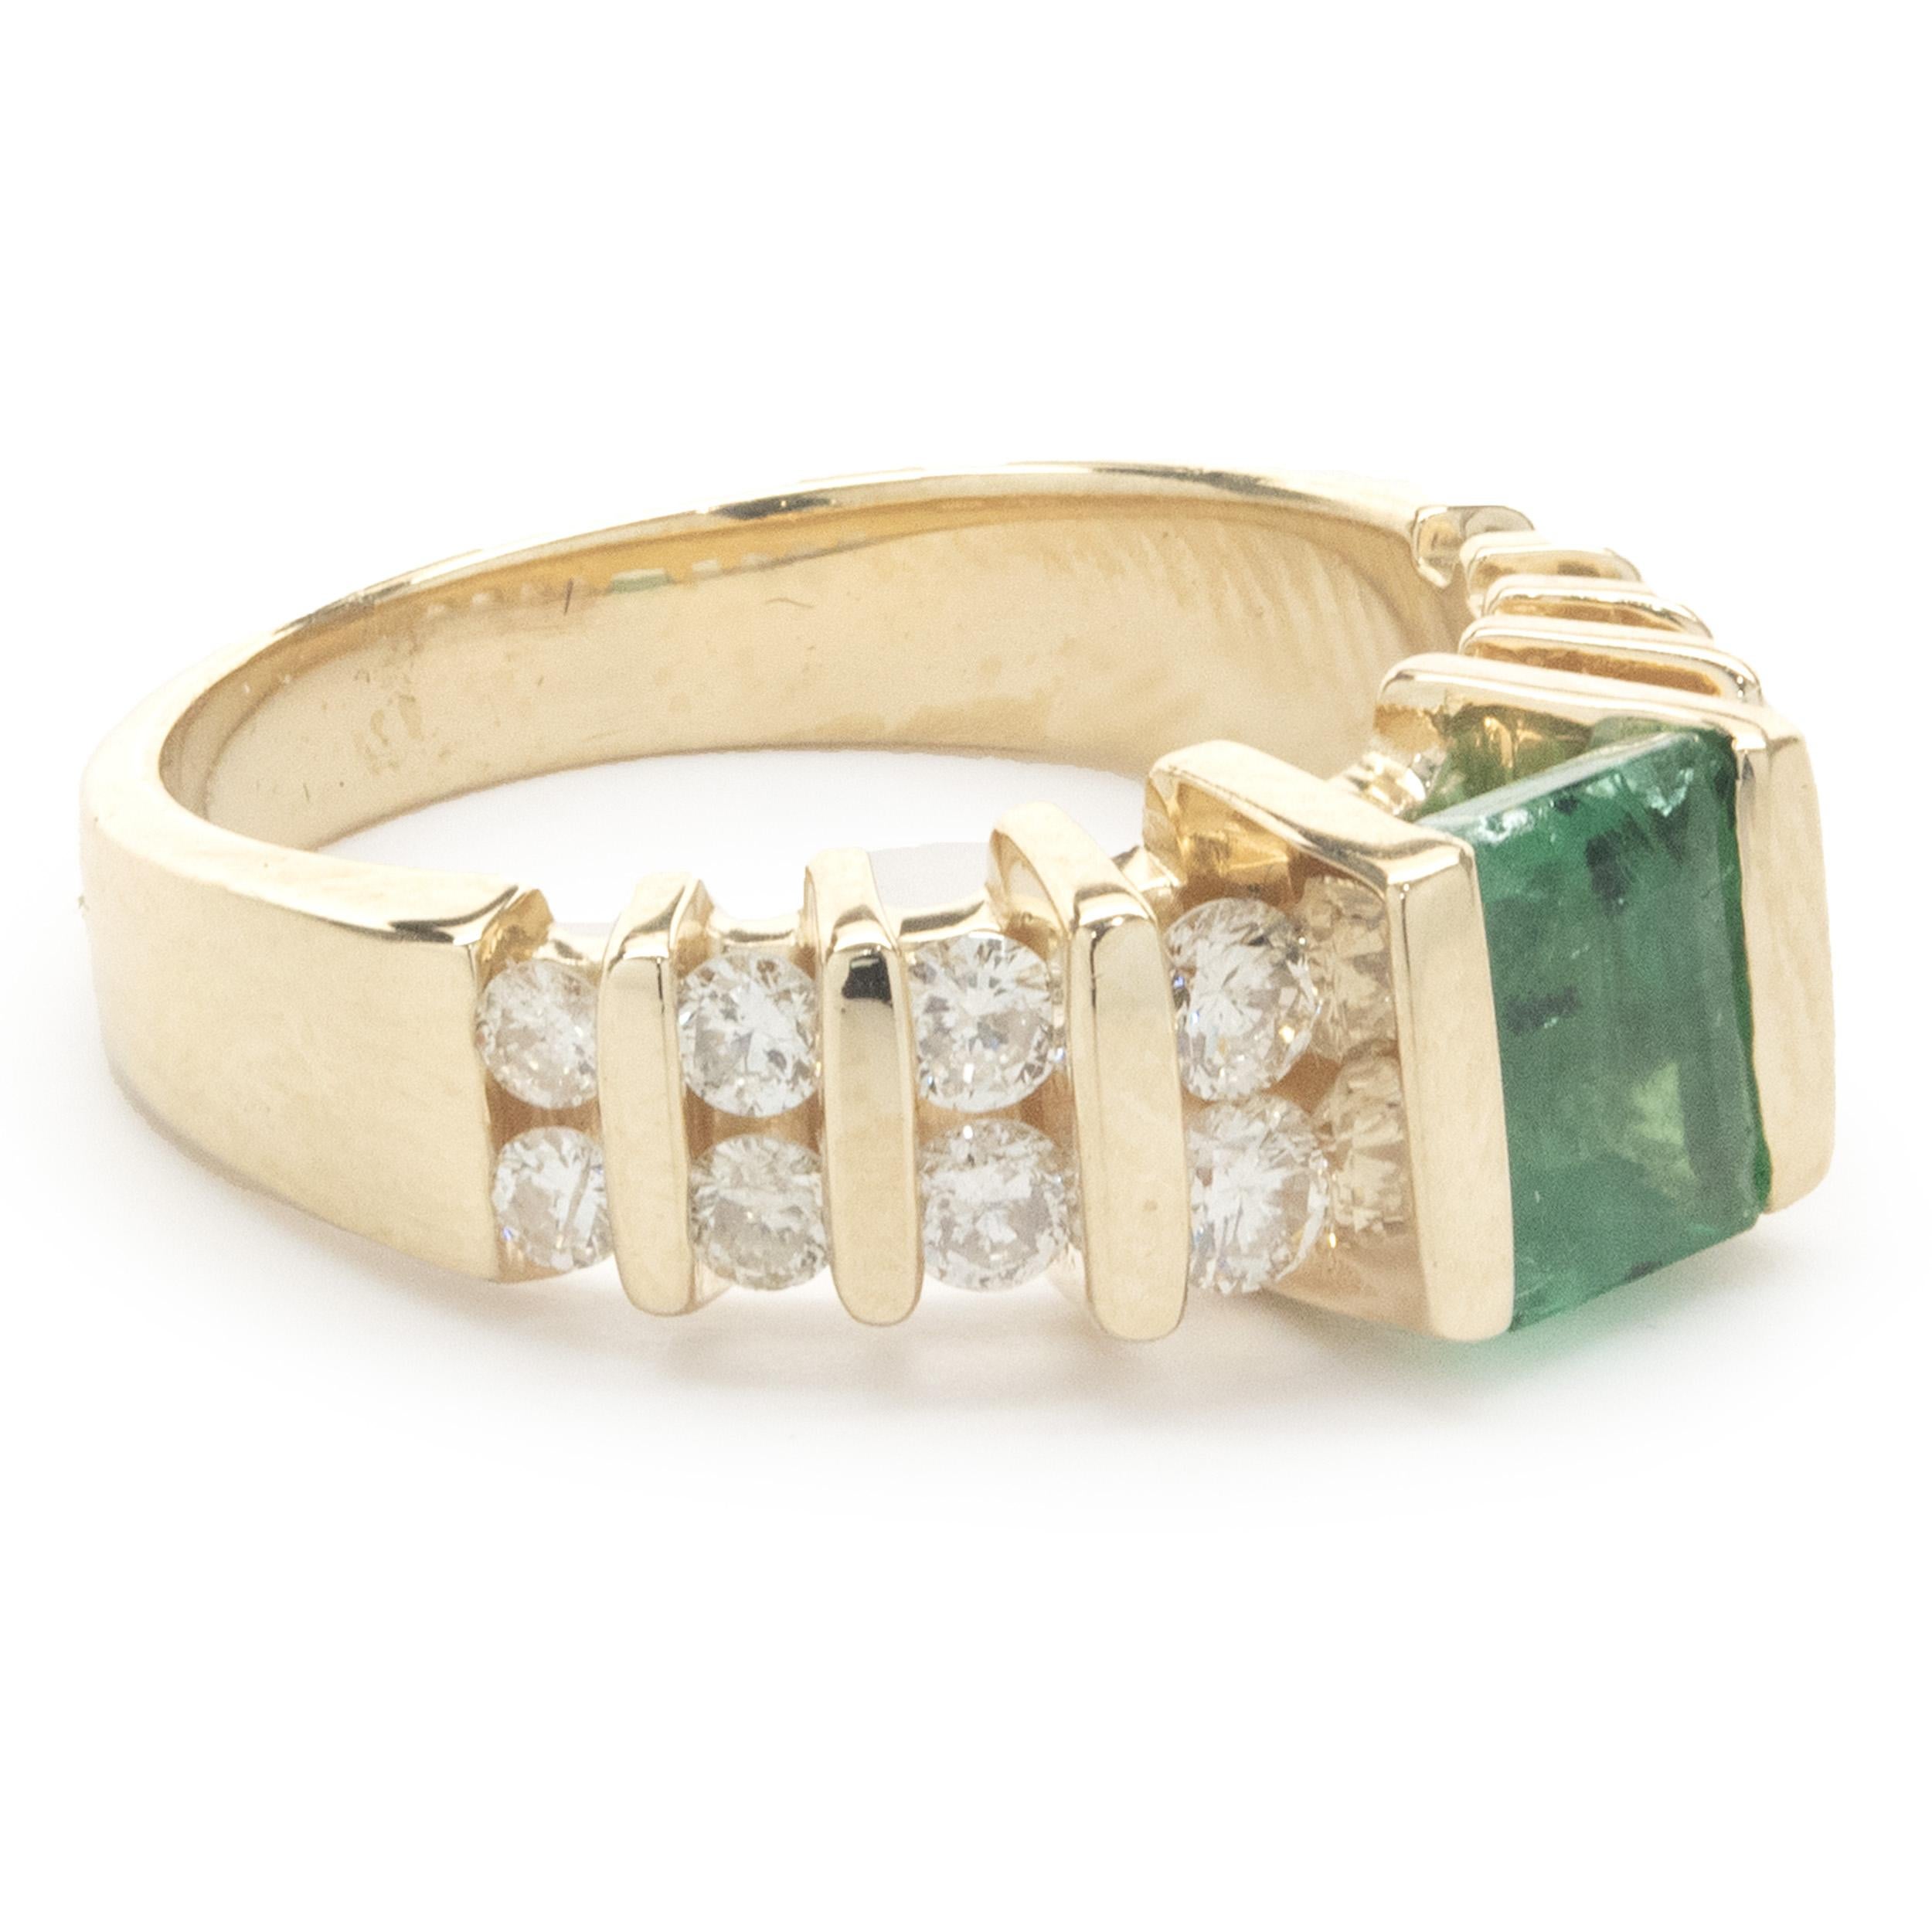 Designer: custom
Material: 14K yellow gold
Diamond: 16 round brilliant cut = 0.48cttw
Color: G
Clarity: SI1
Emerald: 1 emerald cut = 0.64ct
Dimensions: ring top measures 6.40mm wide
Ring Size: 5 (complimentary sizing available)
Weight: 4.74 grams